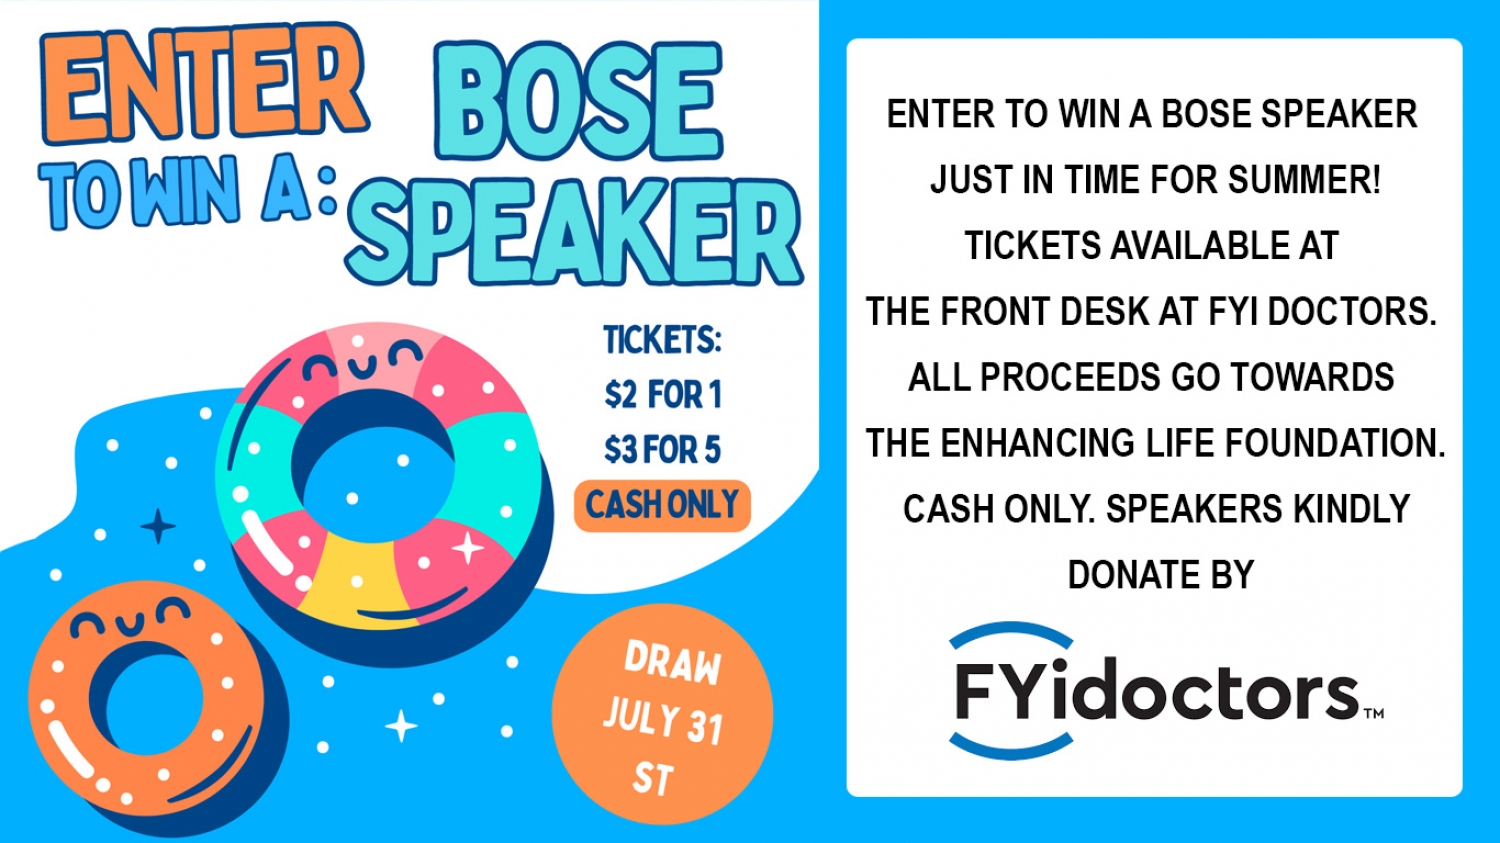 Enter to Win a Bose Speaker